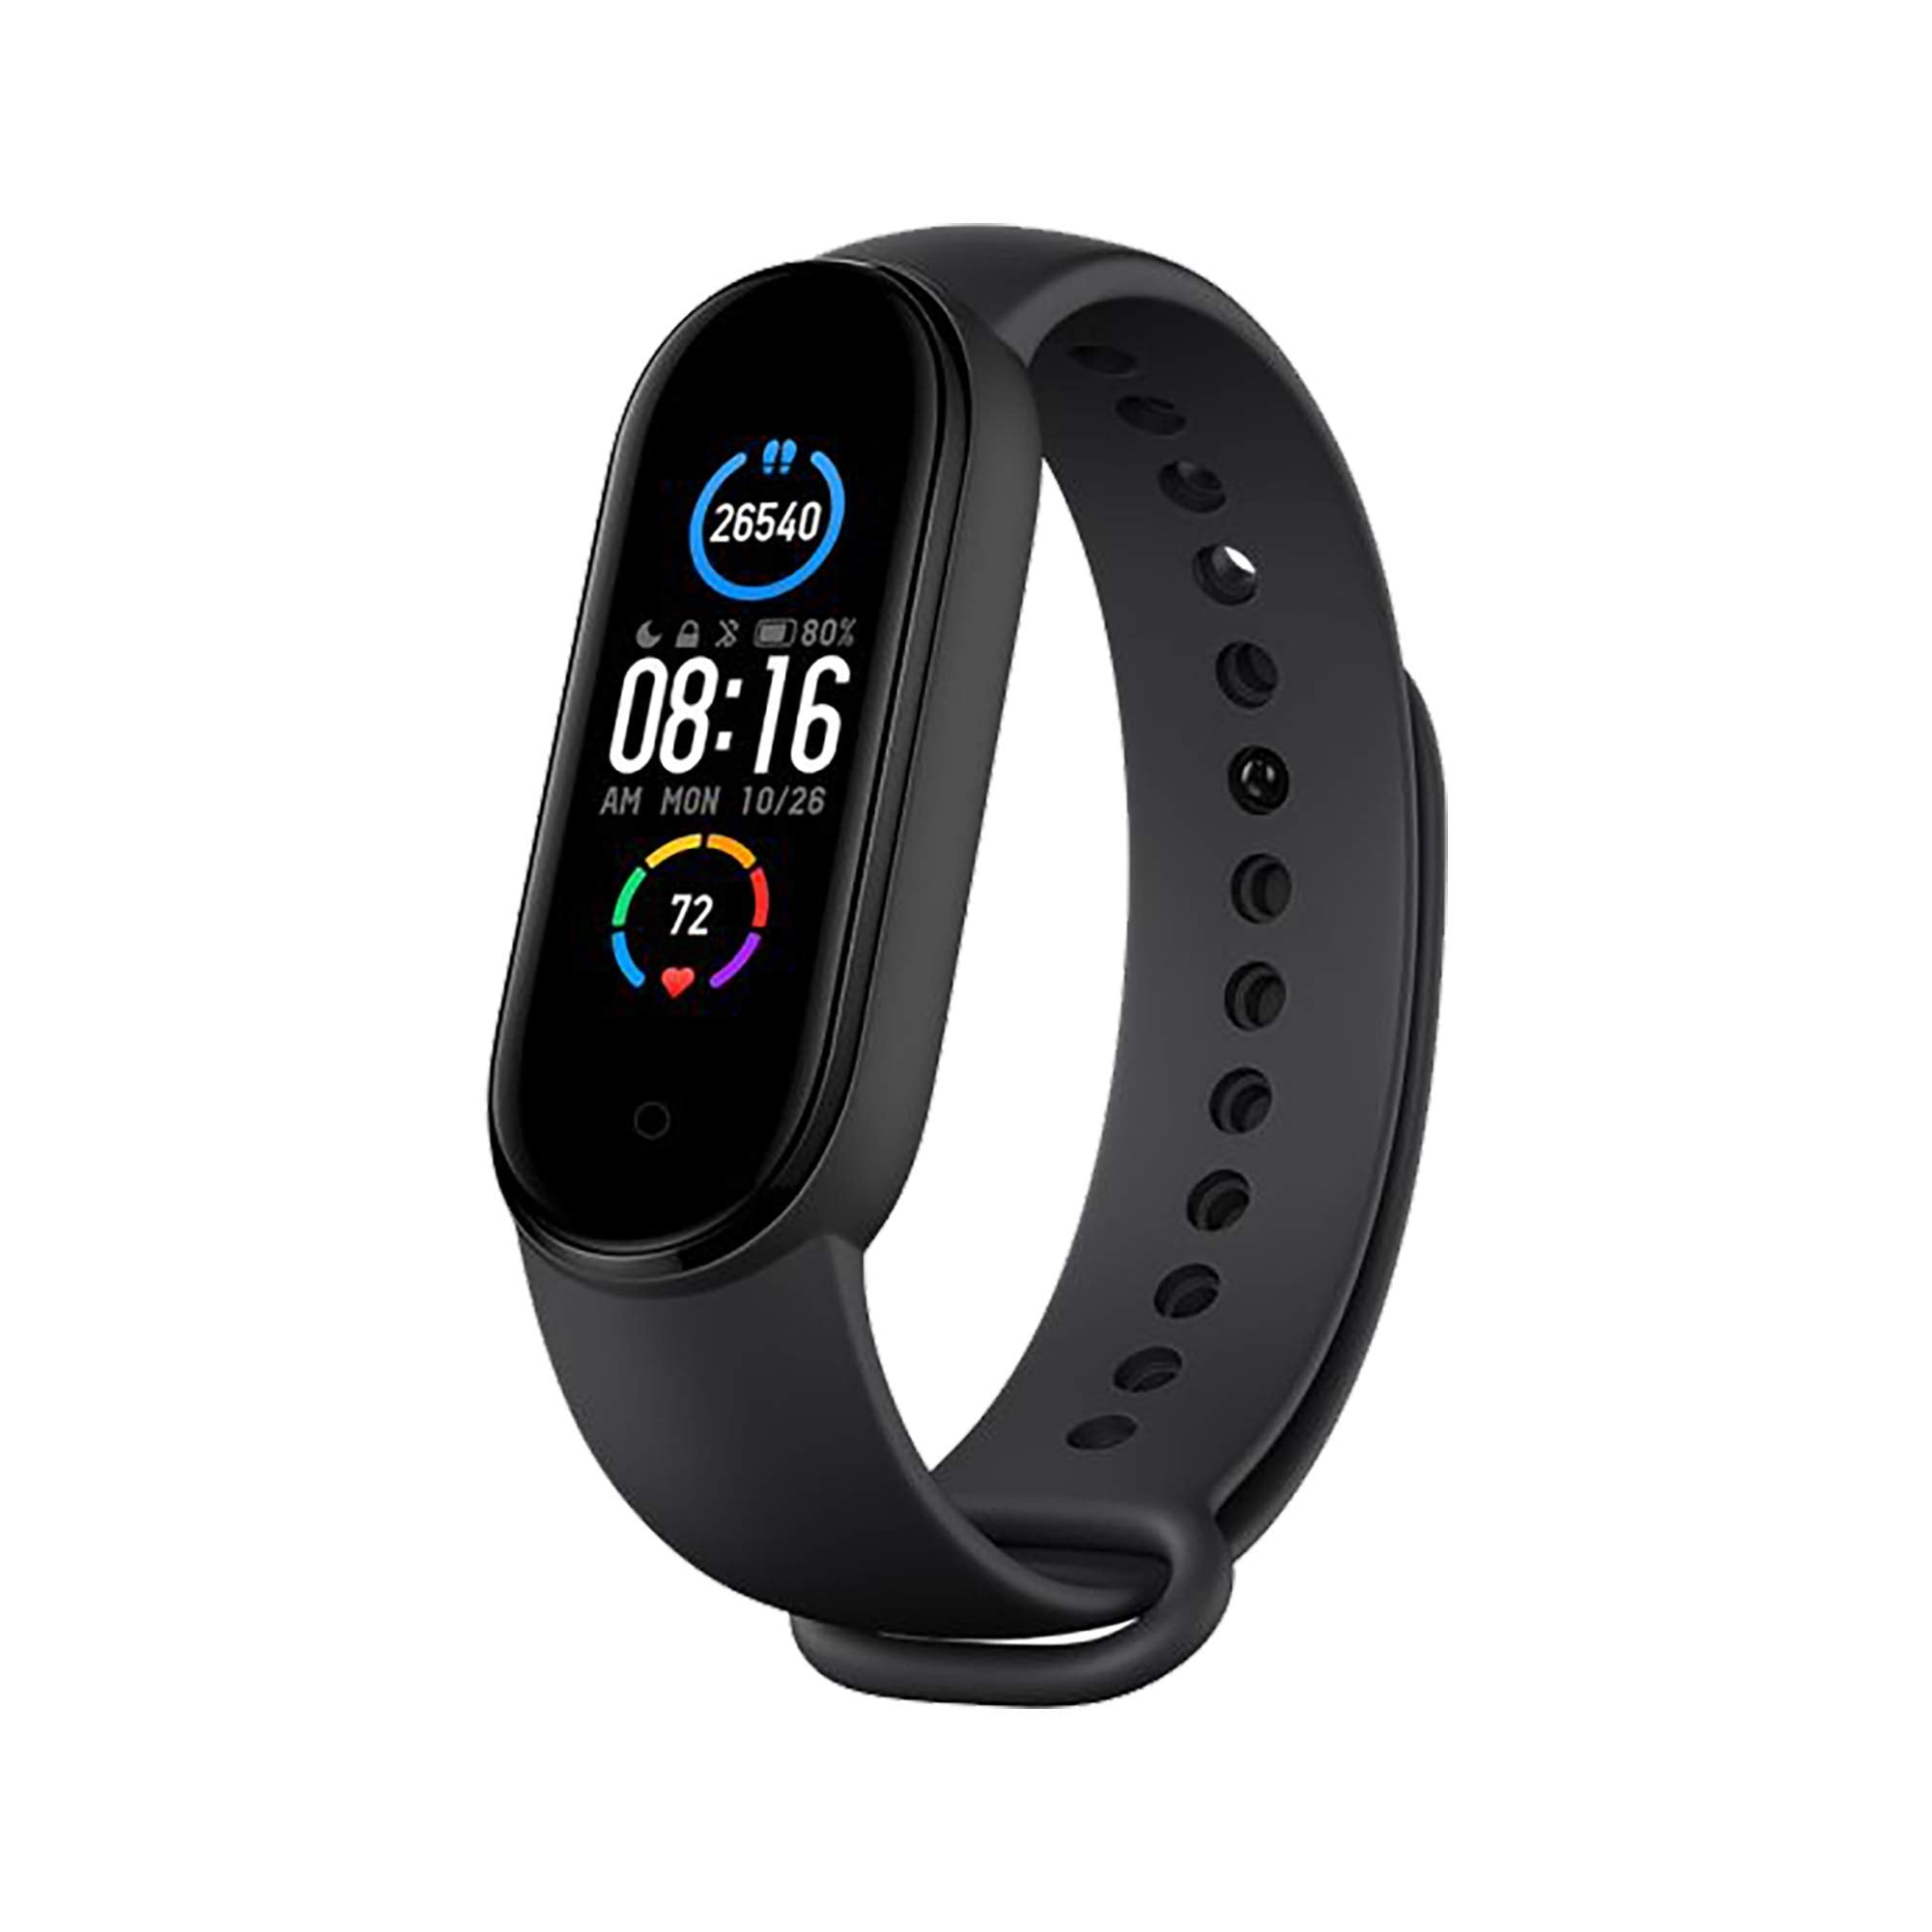 Xiaomi Mi Band 5 Black Health and Fitness Tracker, Upto 14 Days Battery, Heart Rate Monitor, Sleep Tracker, Activity Tracker, 5ATM 50 m Water Resistance and Swimming Tracking, Pedometer, Sleep Counter